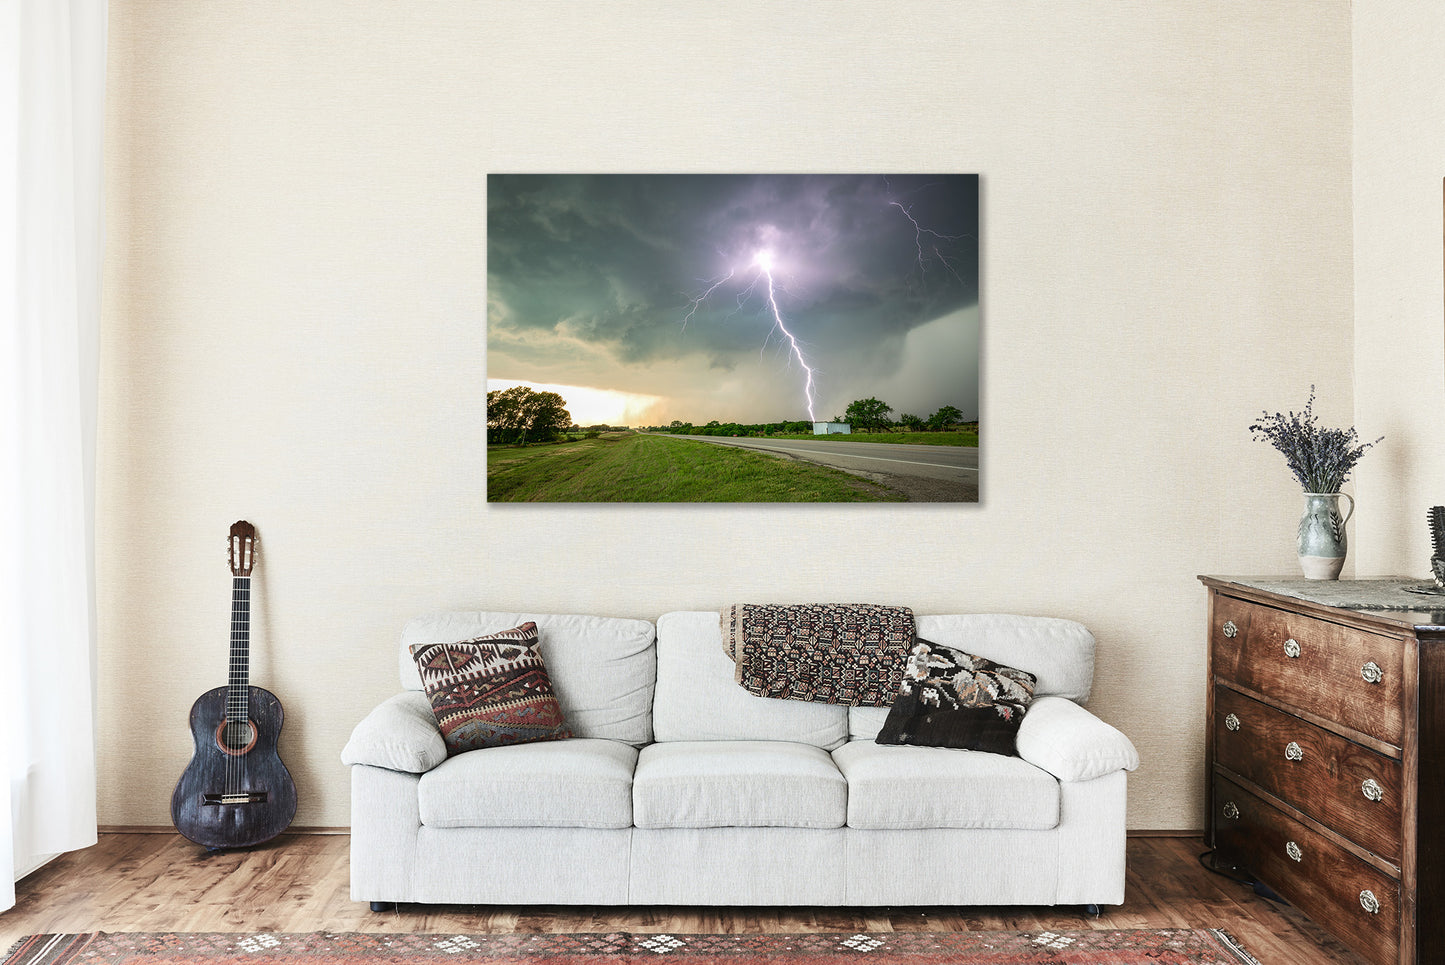 Canvas Wall Art | Lightning Bolt Photo | Extreme Weather Gallery Wrap | Kansas Photography | Storm Picture | Thunderstorm Decor